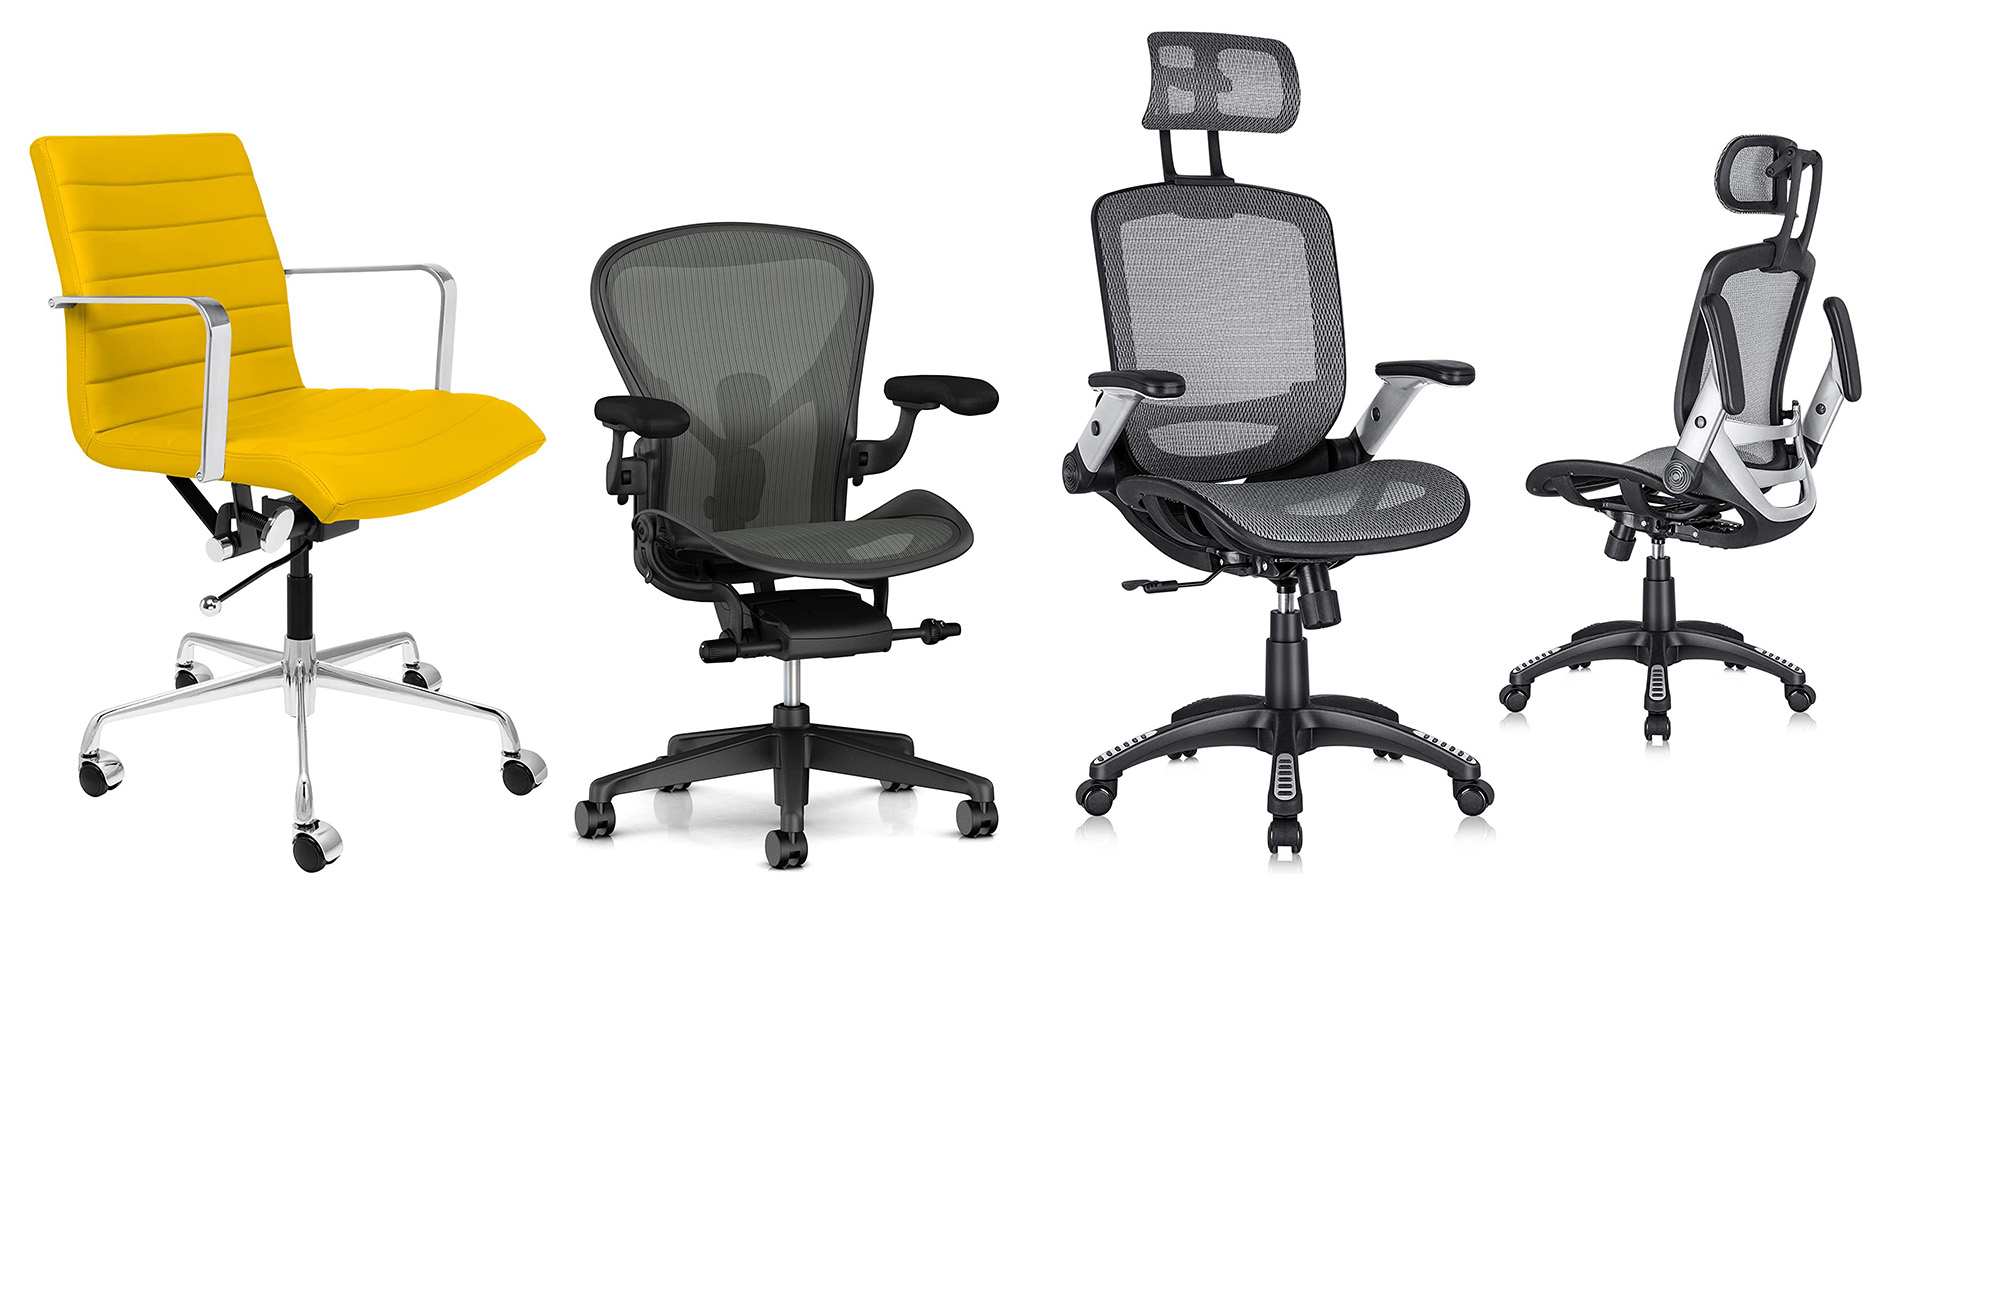 Roundup: The Best Office Chairs for Video Editing